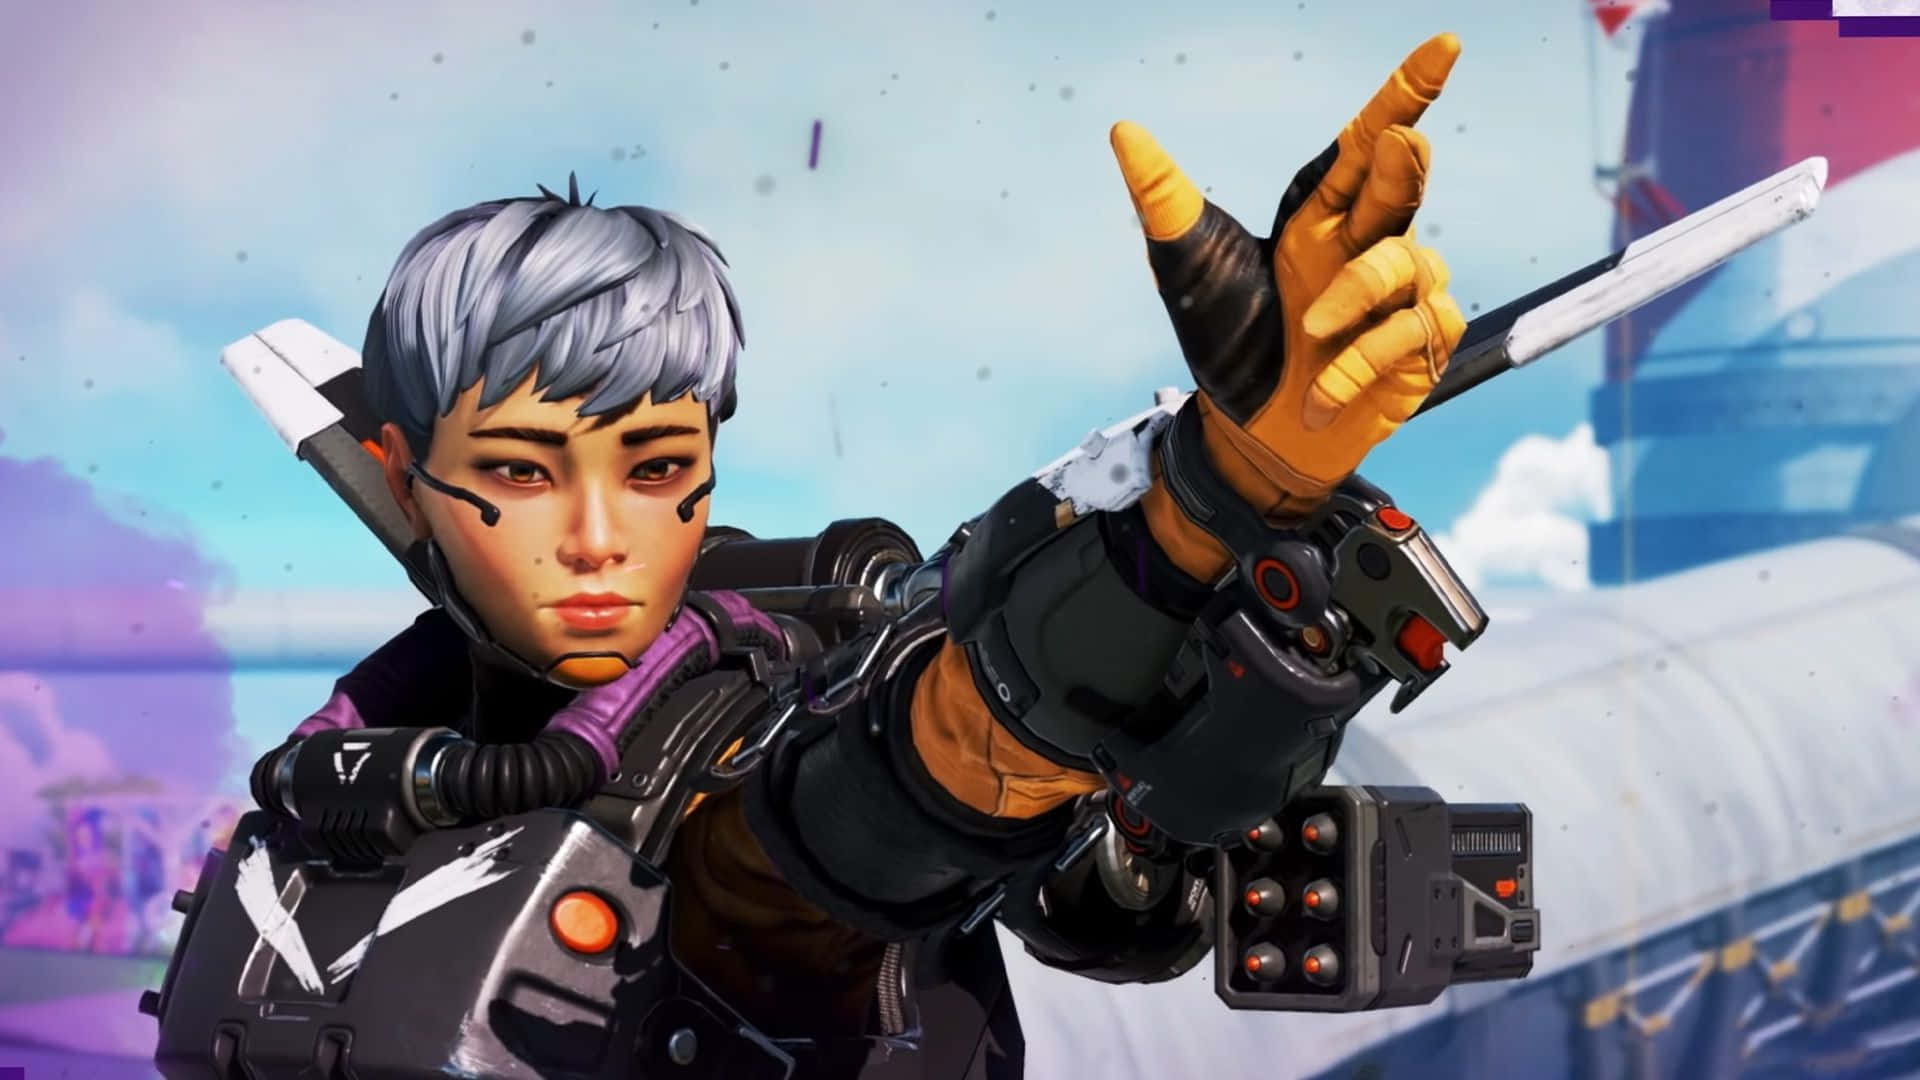 Valkyrie Apex Legends Video Game Preview Wallpaper